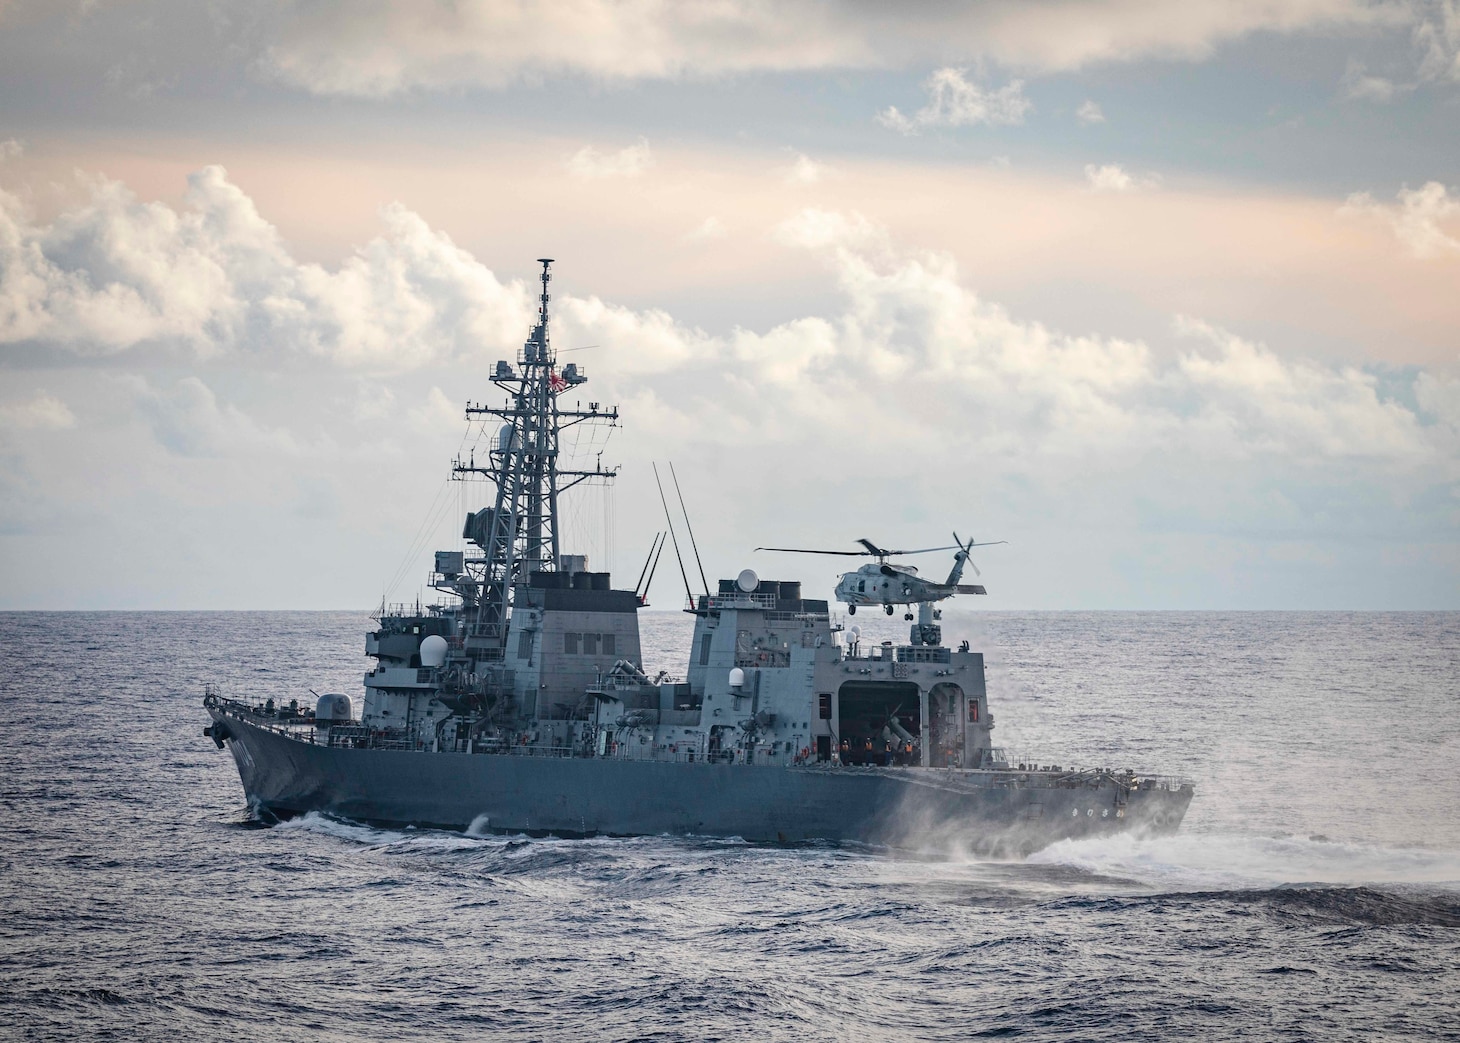 The U.S., JMSDF, and Royal Australian Navy conduct trilateral exercises in the South China Sea.